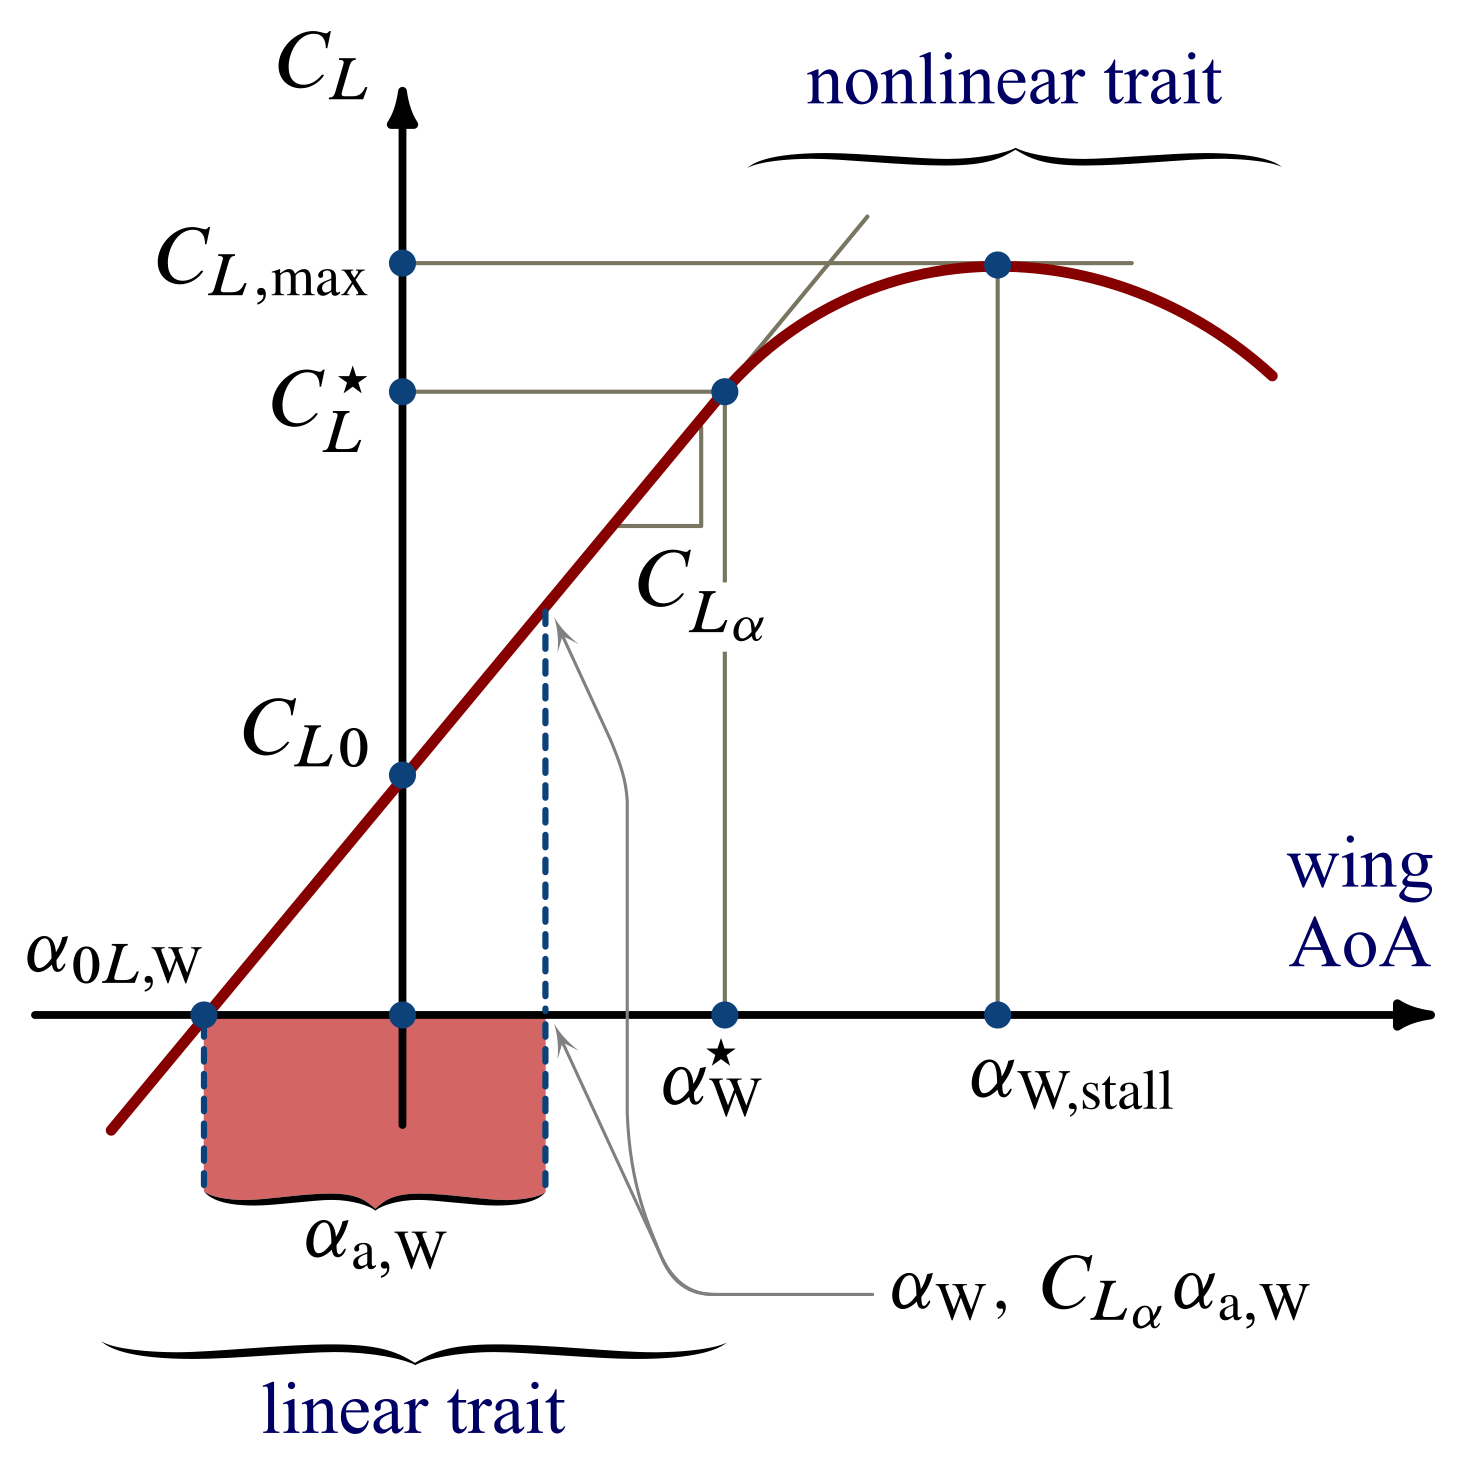 A typical curve of wing lift coefficient $C_L$ versus wing angle of attack $\alpha_\mathrm{W}$.